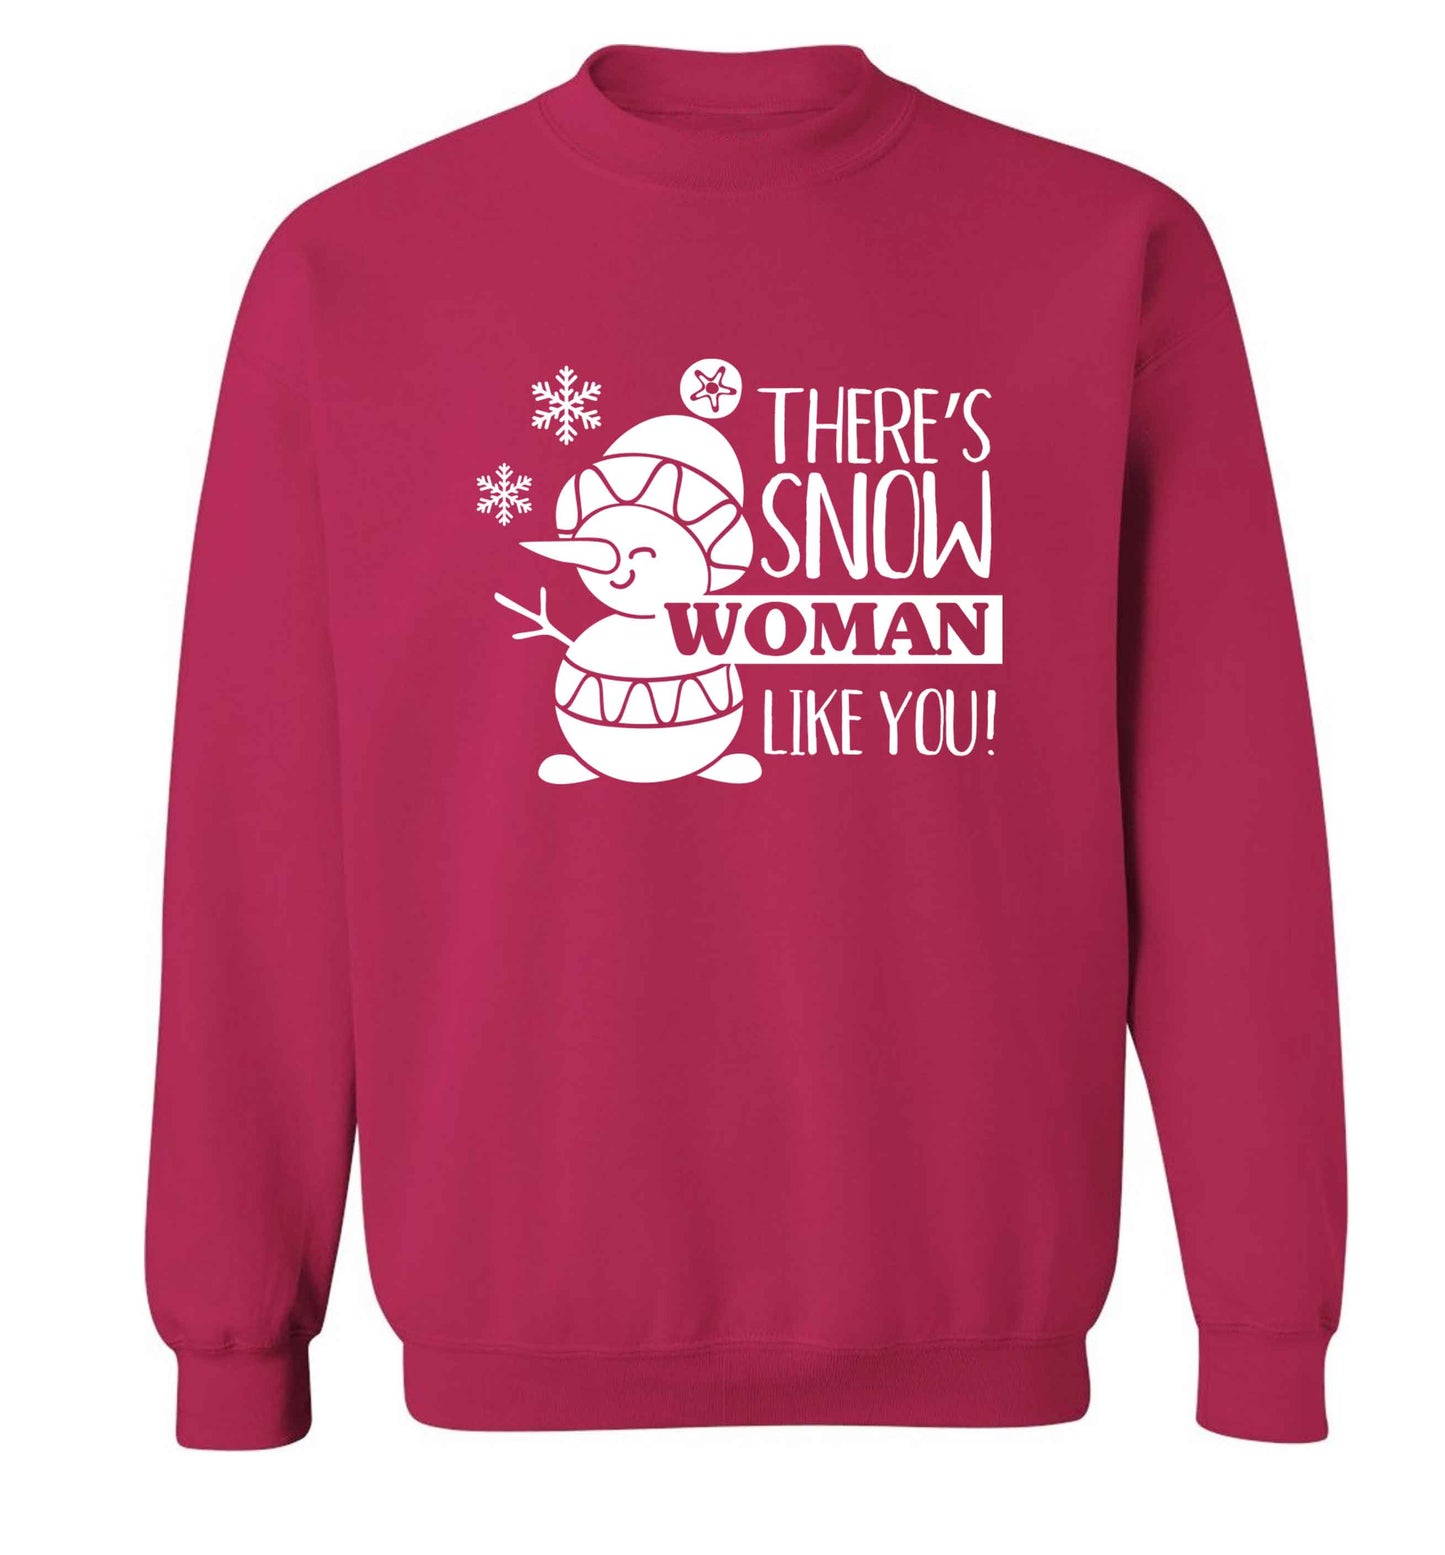 There's snow woman like you adult's unisex pink sweater 2XL